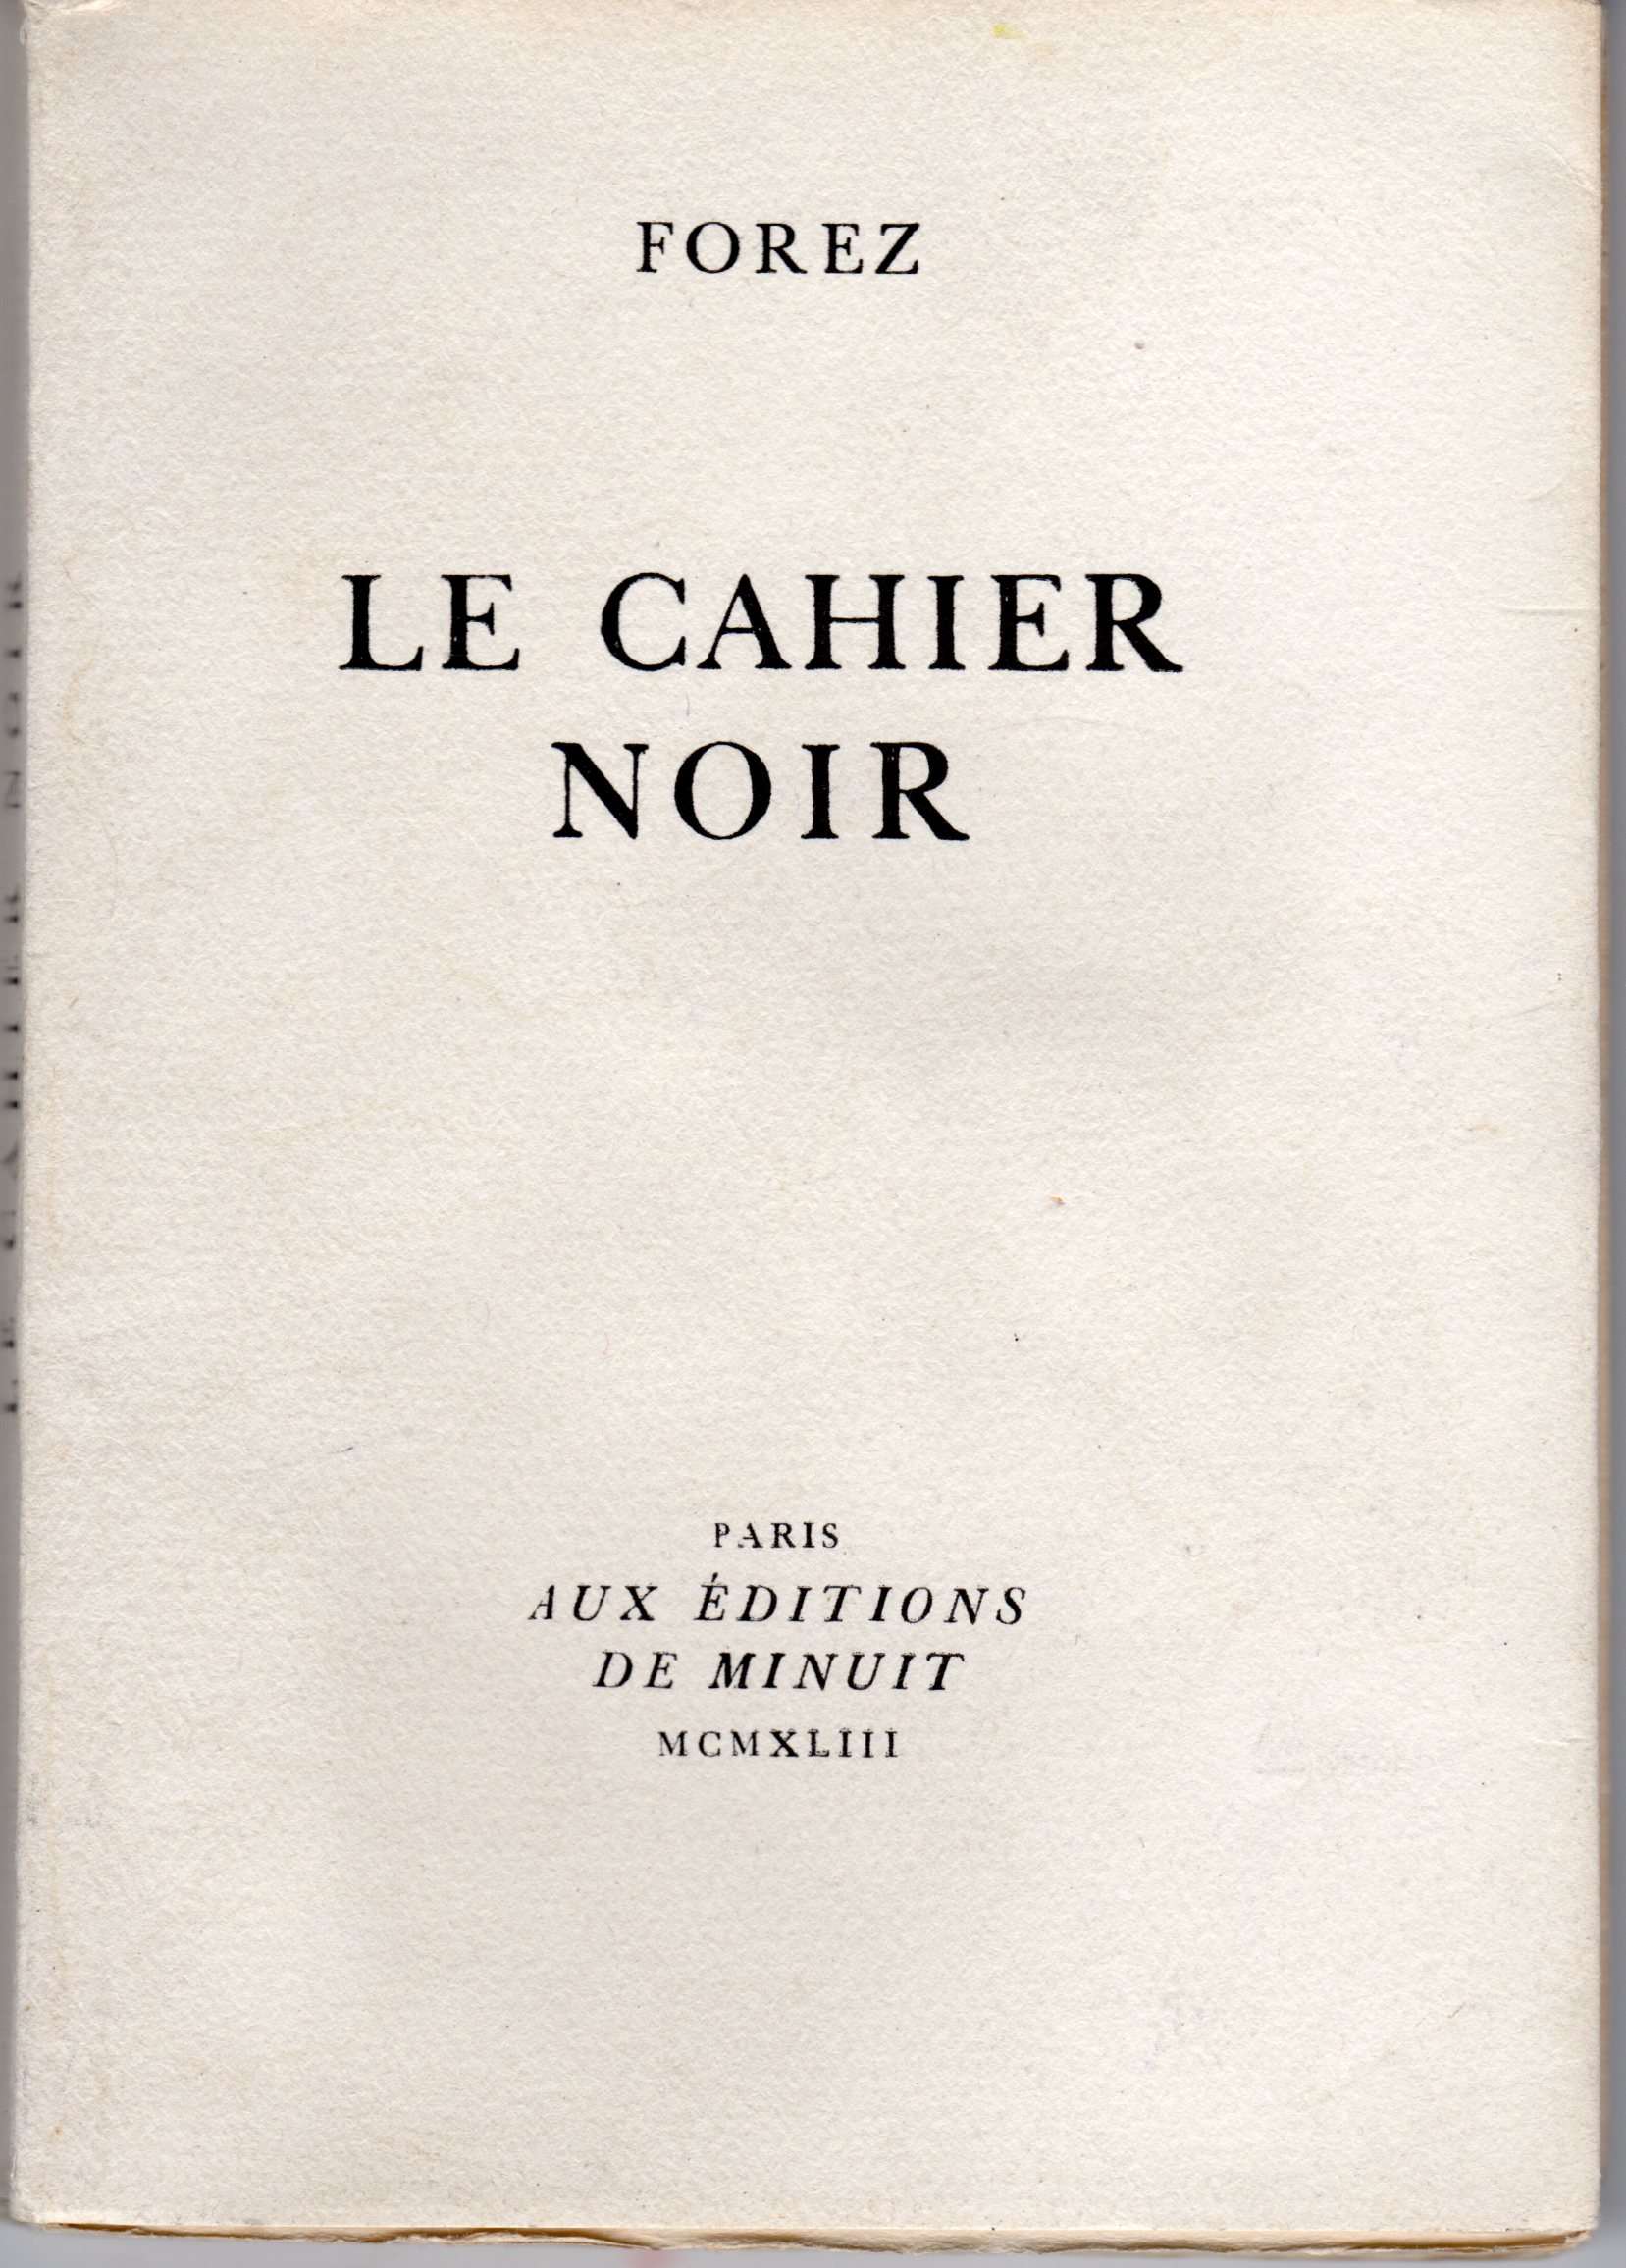 METERIE : Le cahier noir - Signed book, First edition 